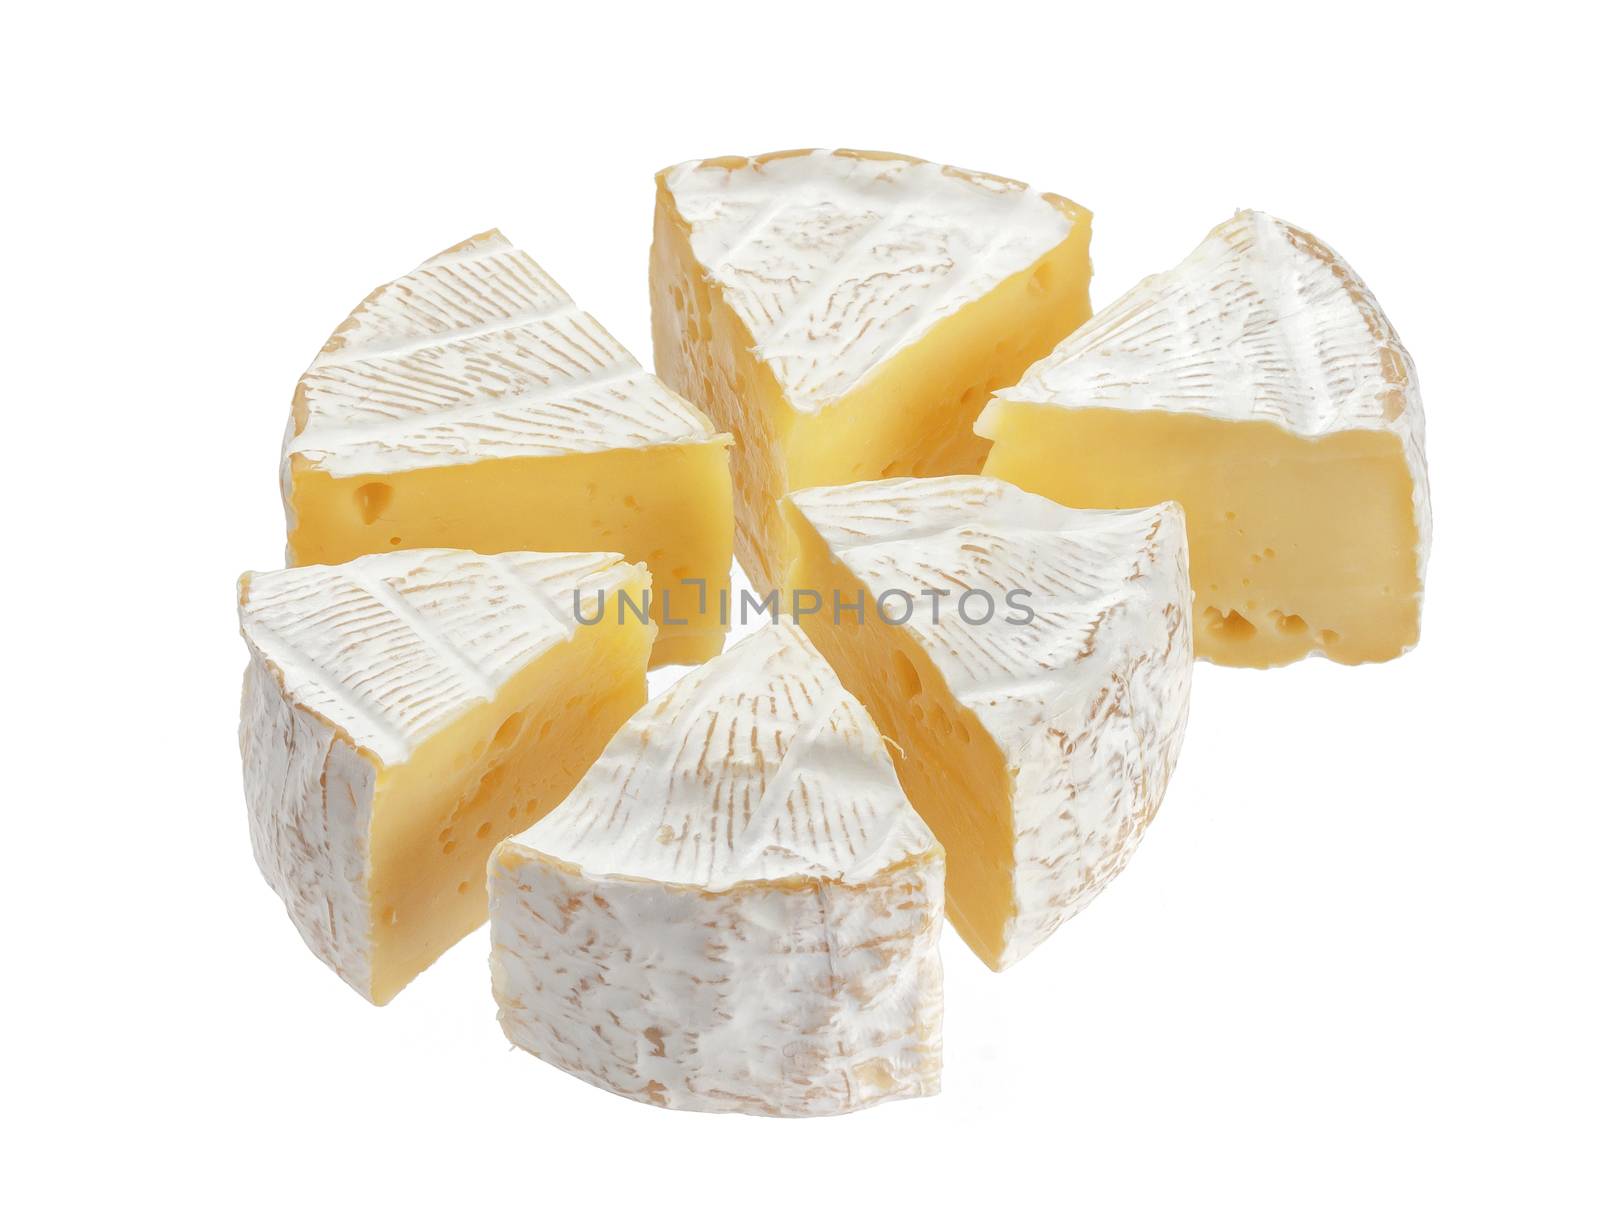 Camembert cheese segments isolated on white background with clipping path